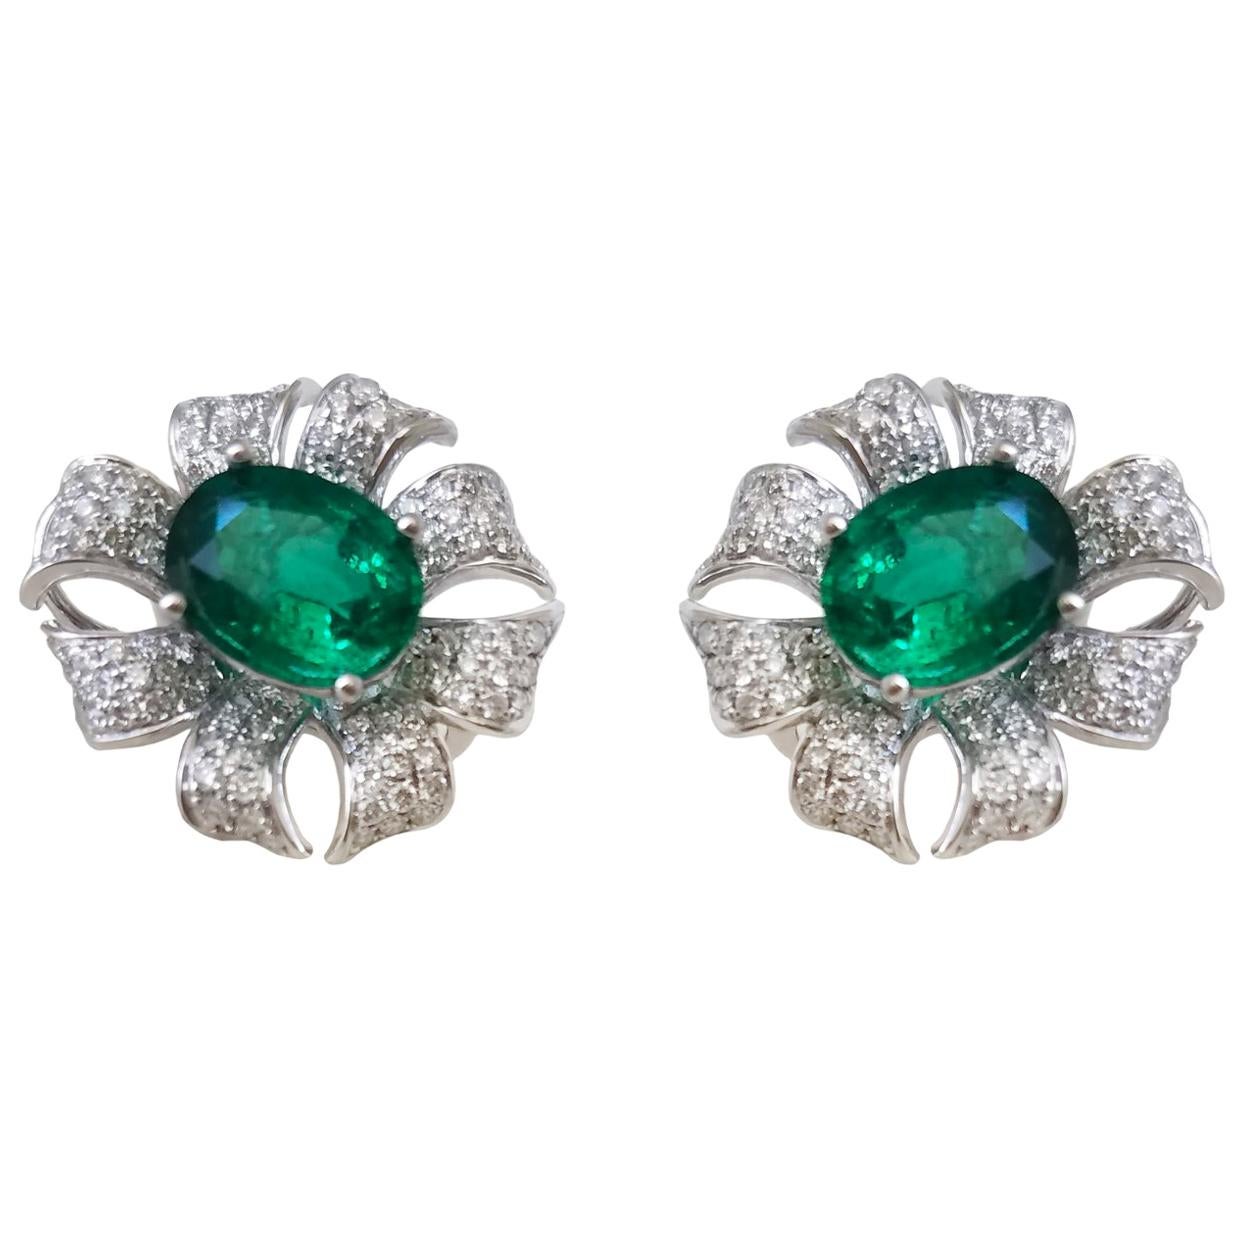 Floral Diamond and Emerald Stud Earrings